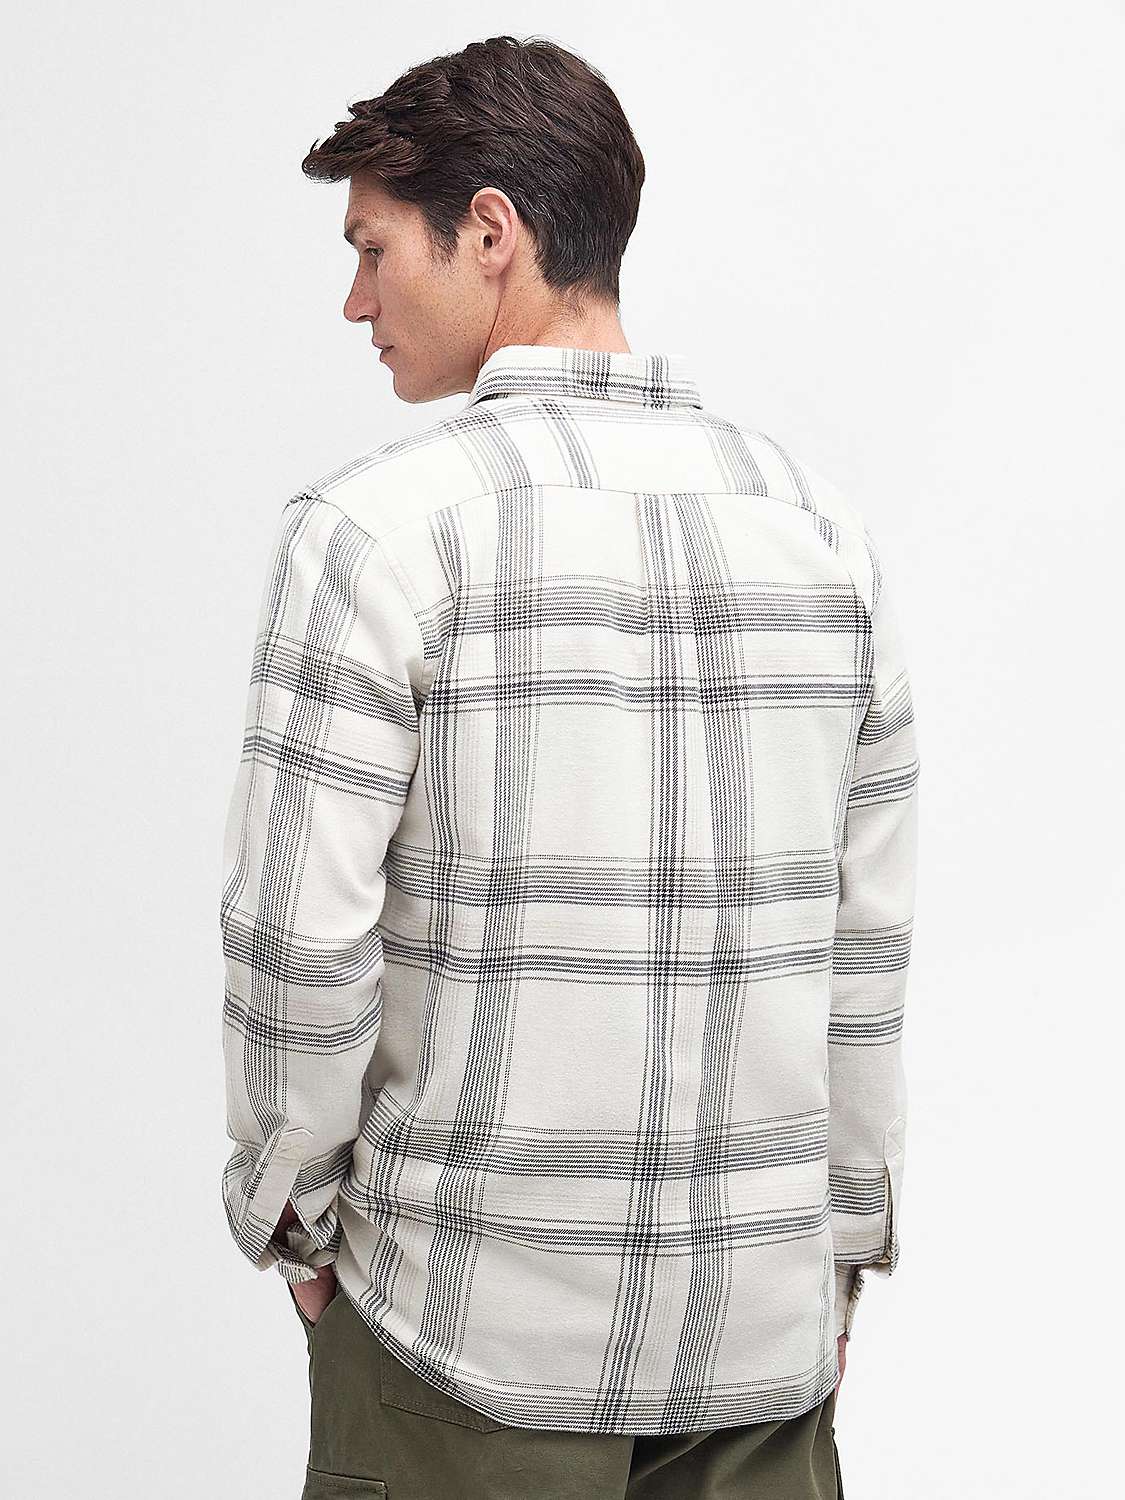 Buy Barbour Newhaven Tailored Shirt, Ecru/Multi Online at johnlewis.com